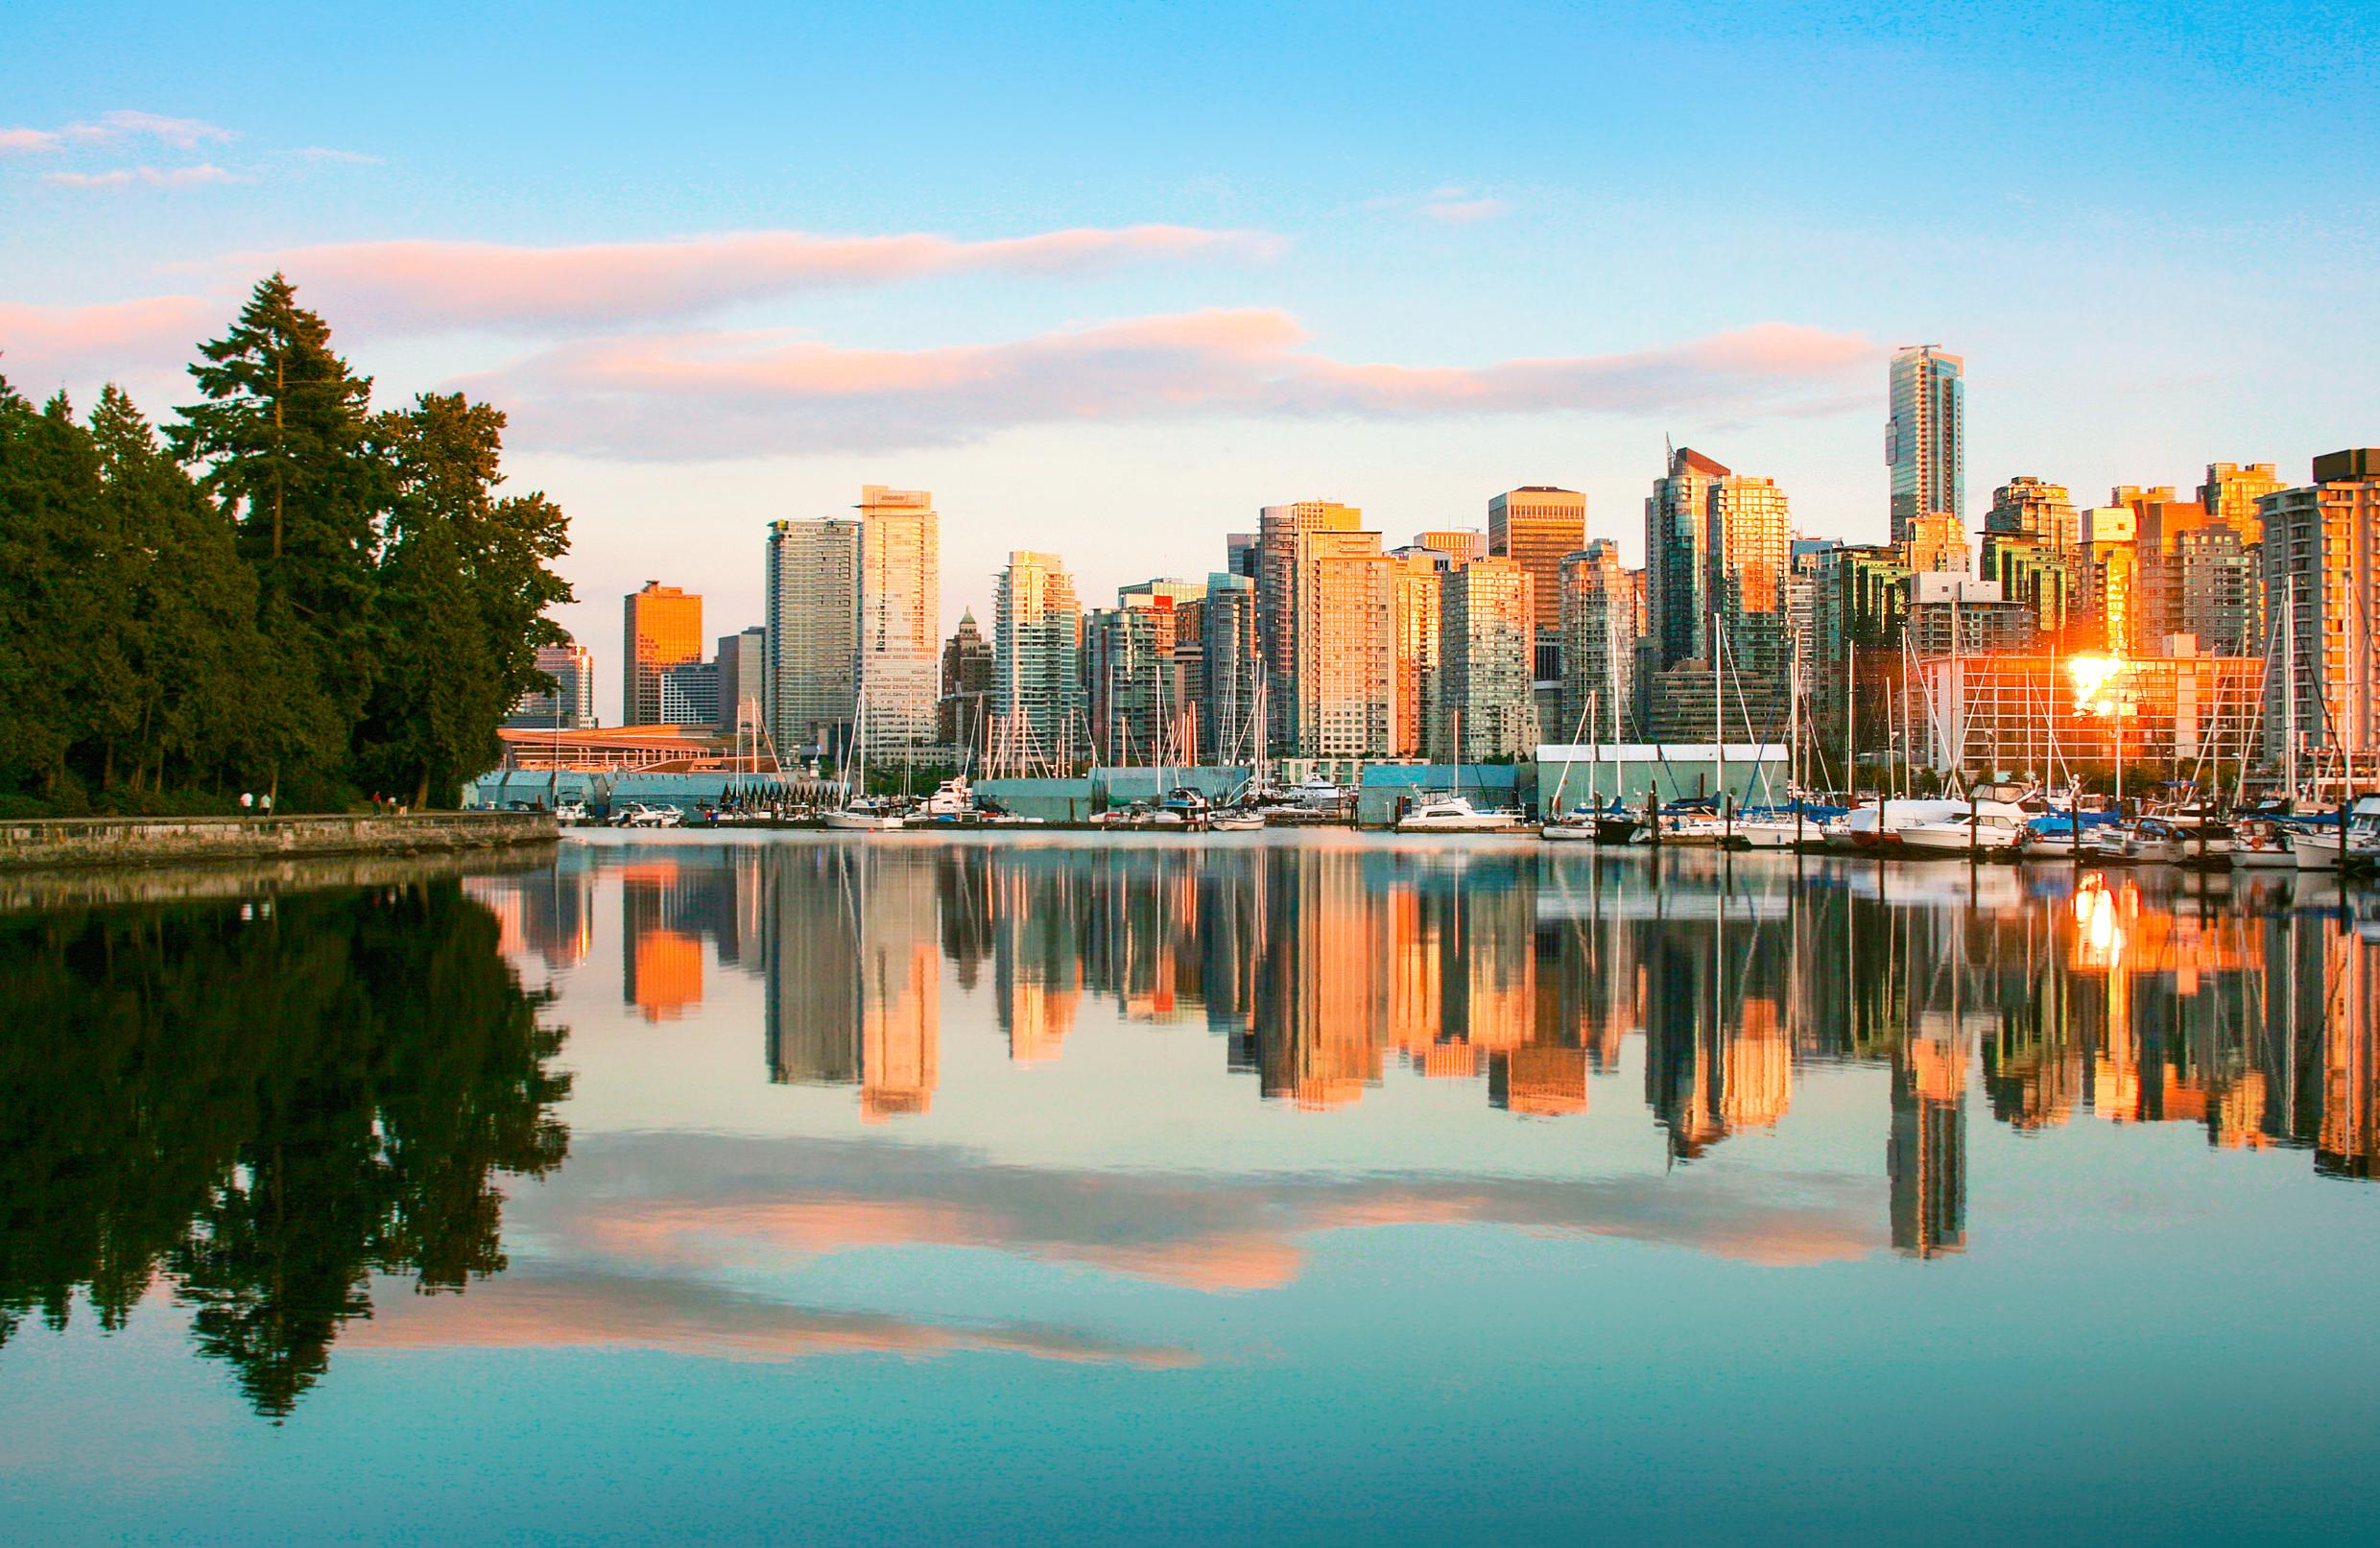 The Vancouver city, cover photo